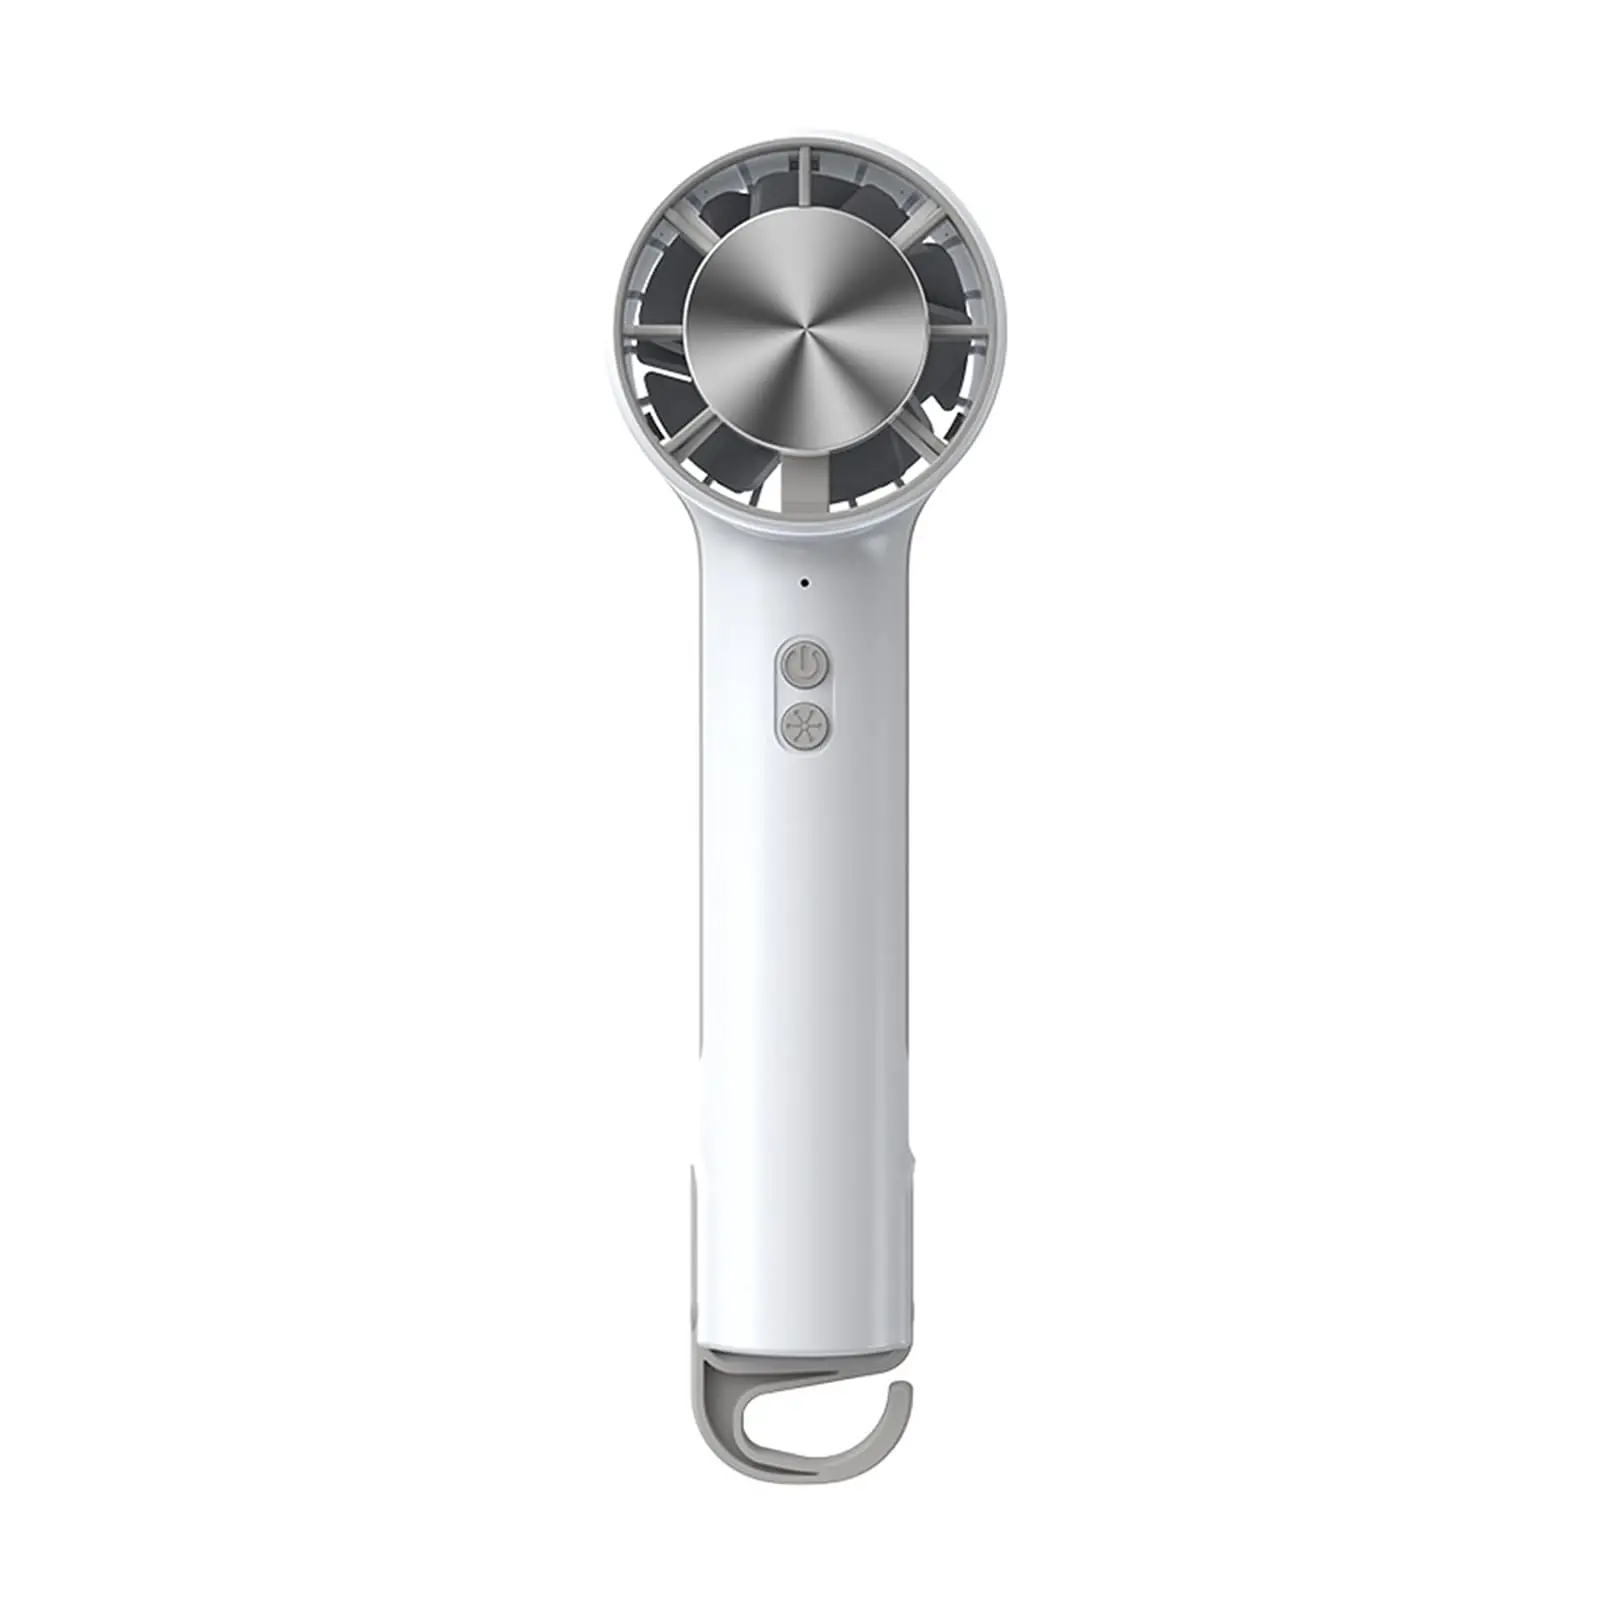 

Portable Handheld Fan Compact Cooling with Cooling Plate Air Conditioner Fans Handheld Speed Adjustable Rechargeable